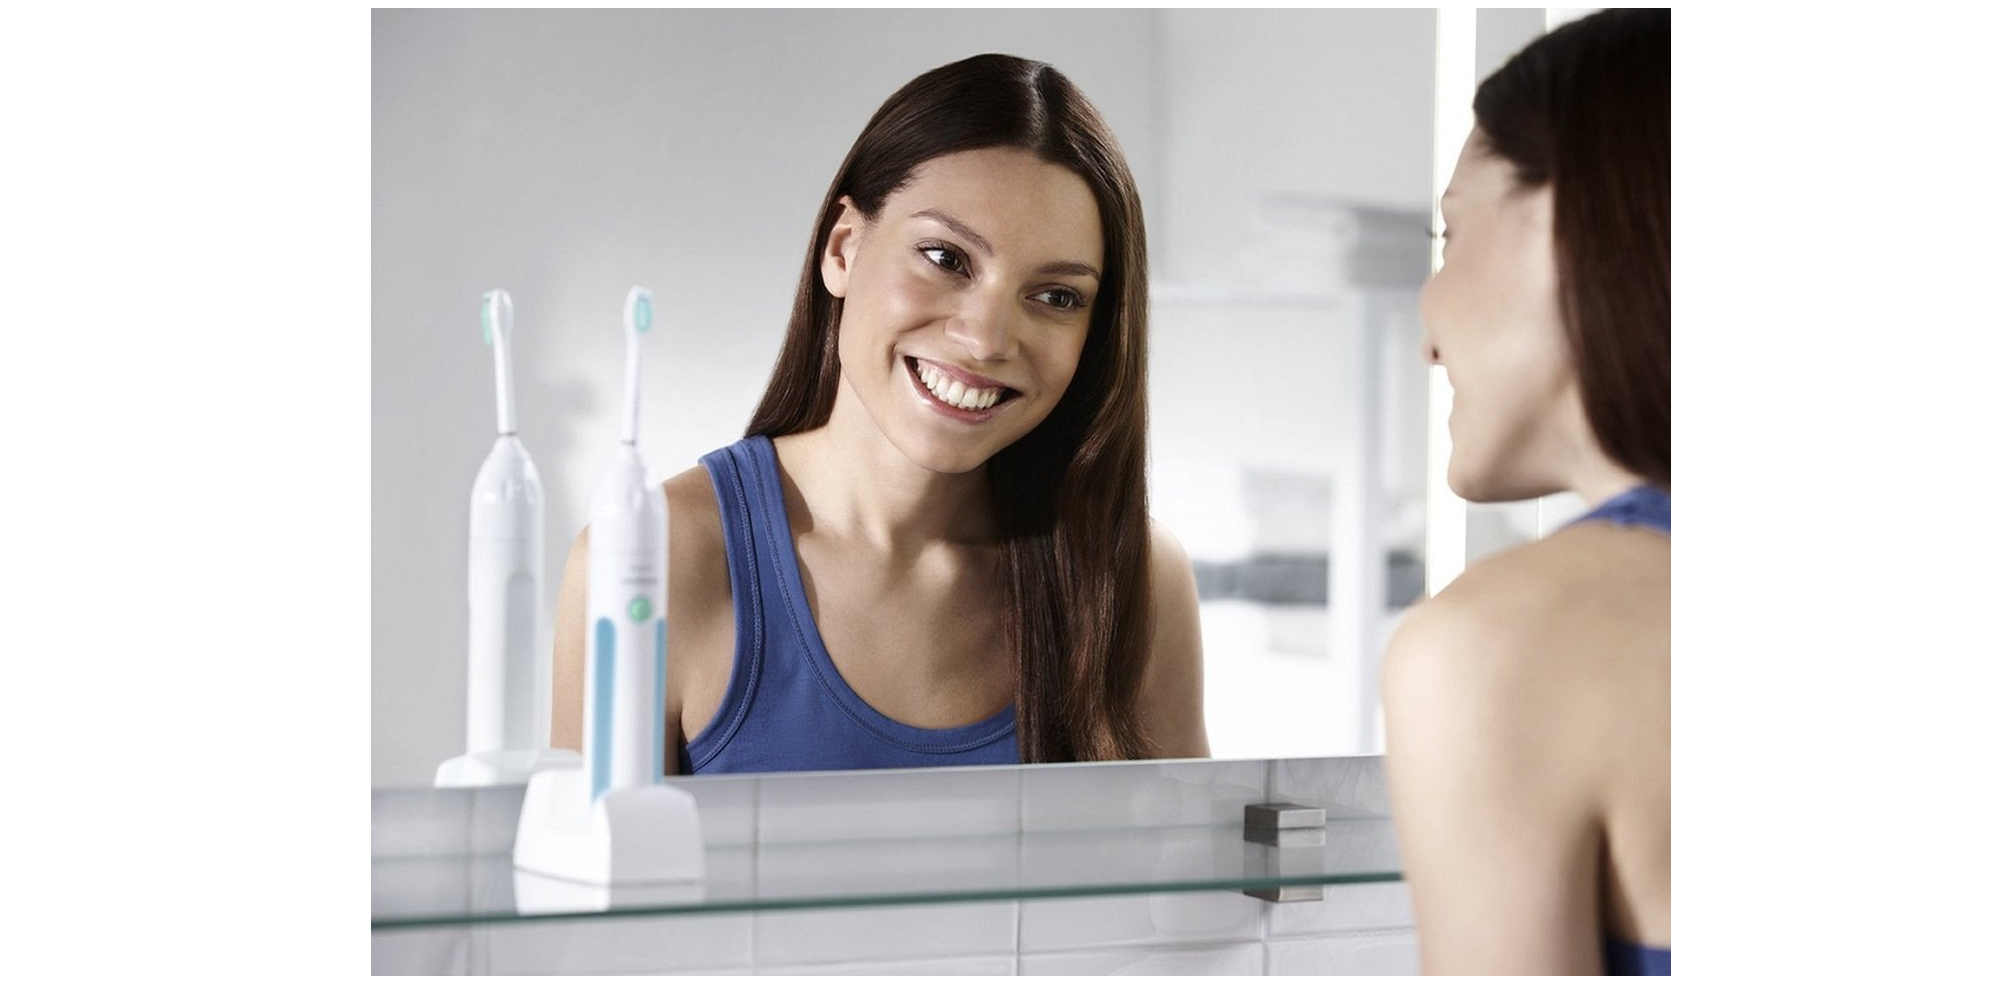 Philips Sonicare Essence Sonic Electric Rechargeable Toothbrush Just $19.95! Down From $49.99!